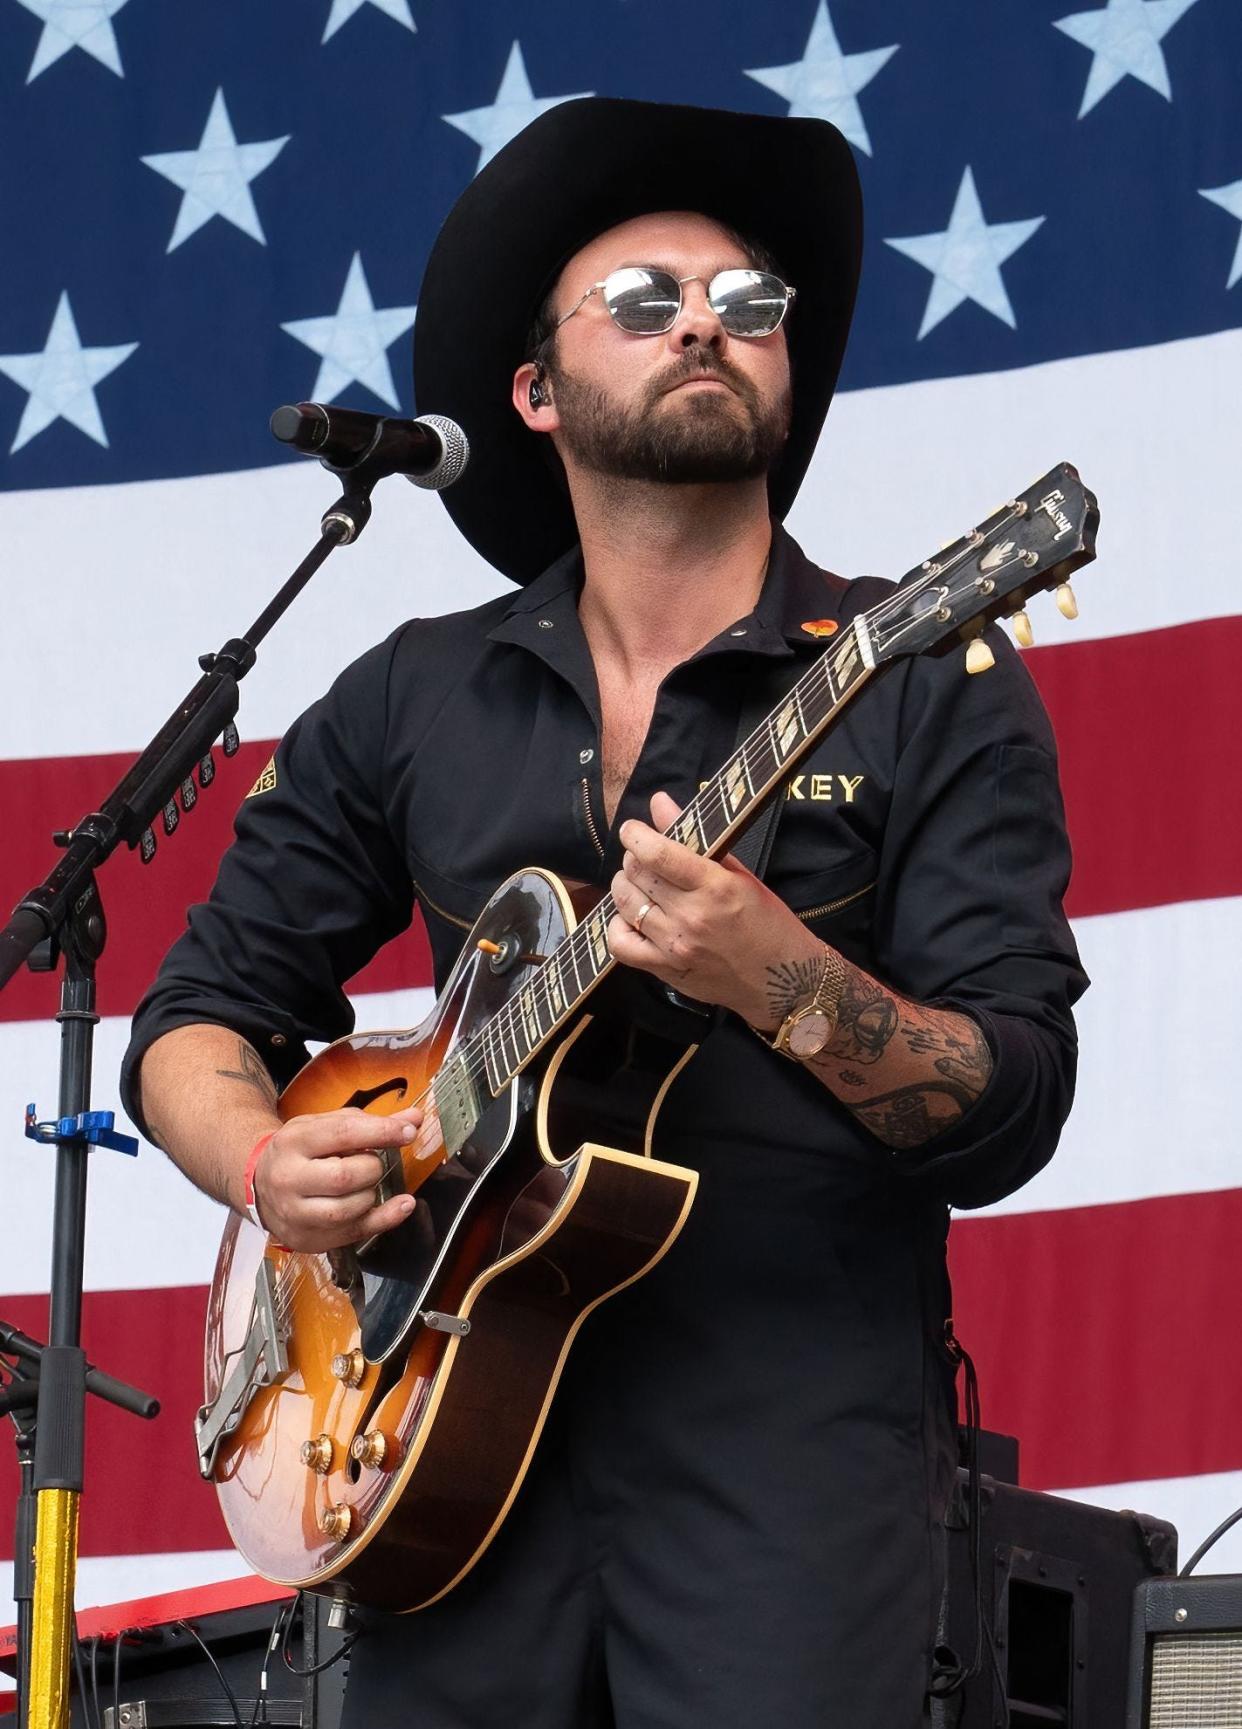 Shakey Graves performs on stage during Willie Nelson's 4th of July picnic and fireworks show at Q2 Stadium in Austin, Texas last summer.